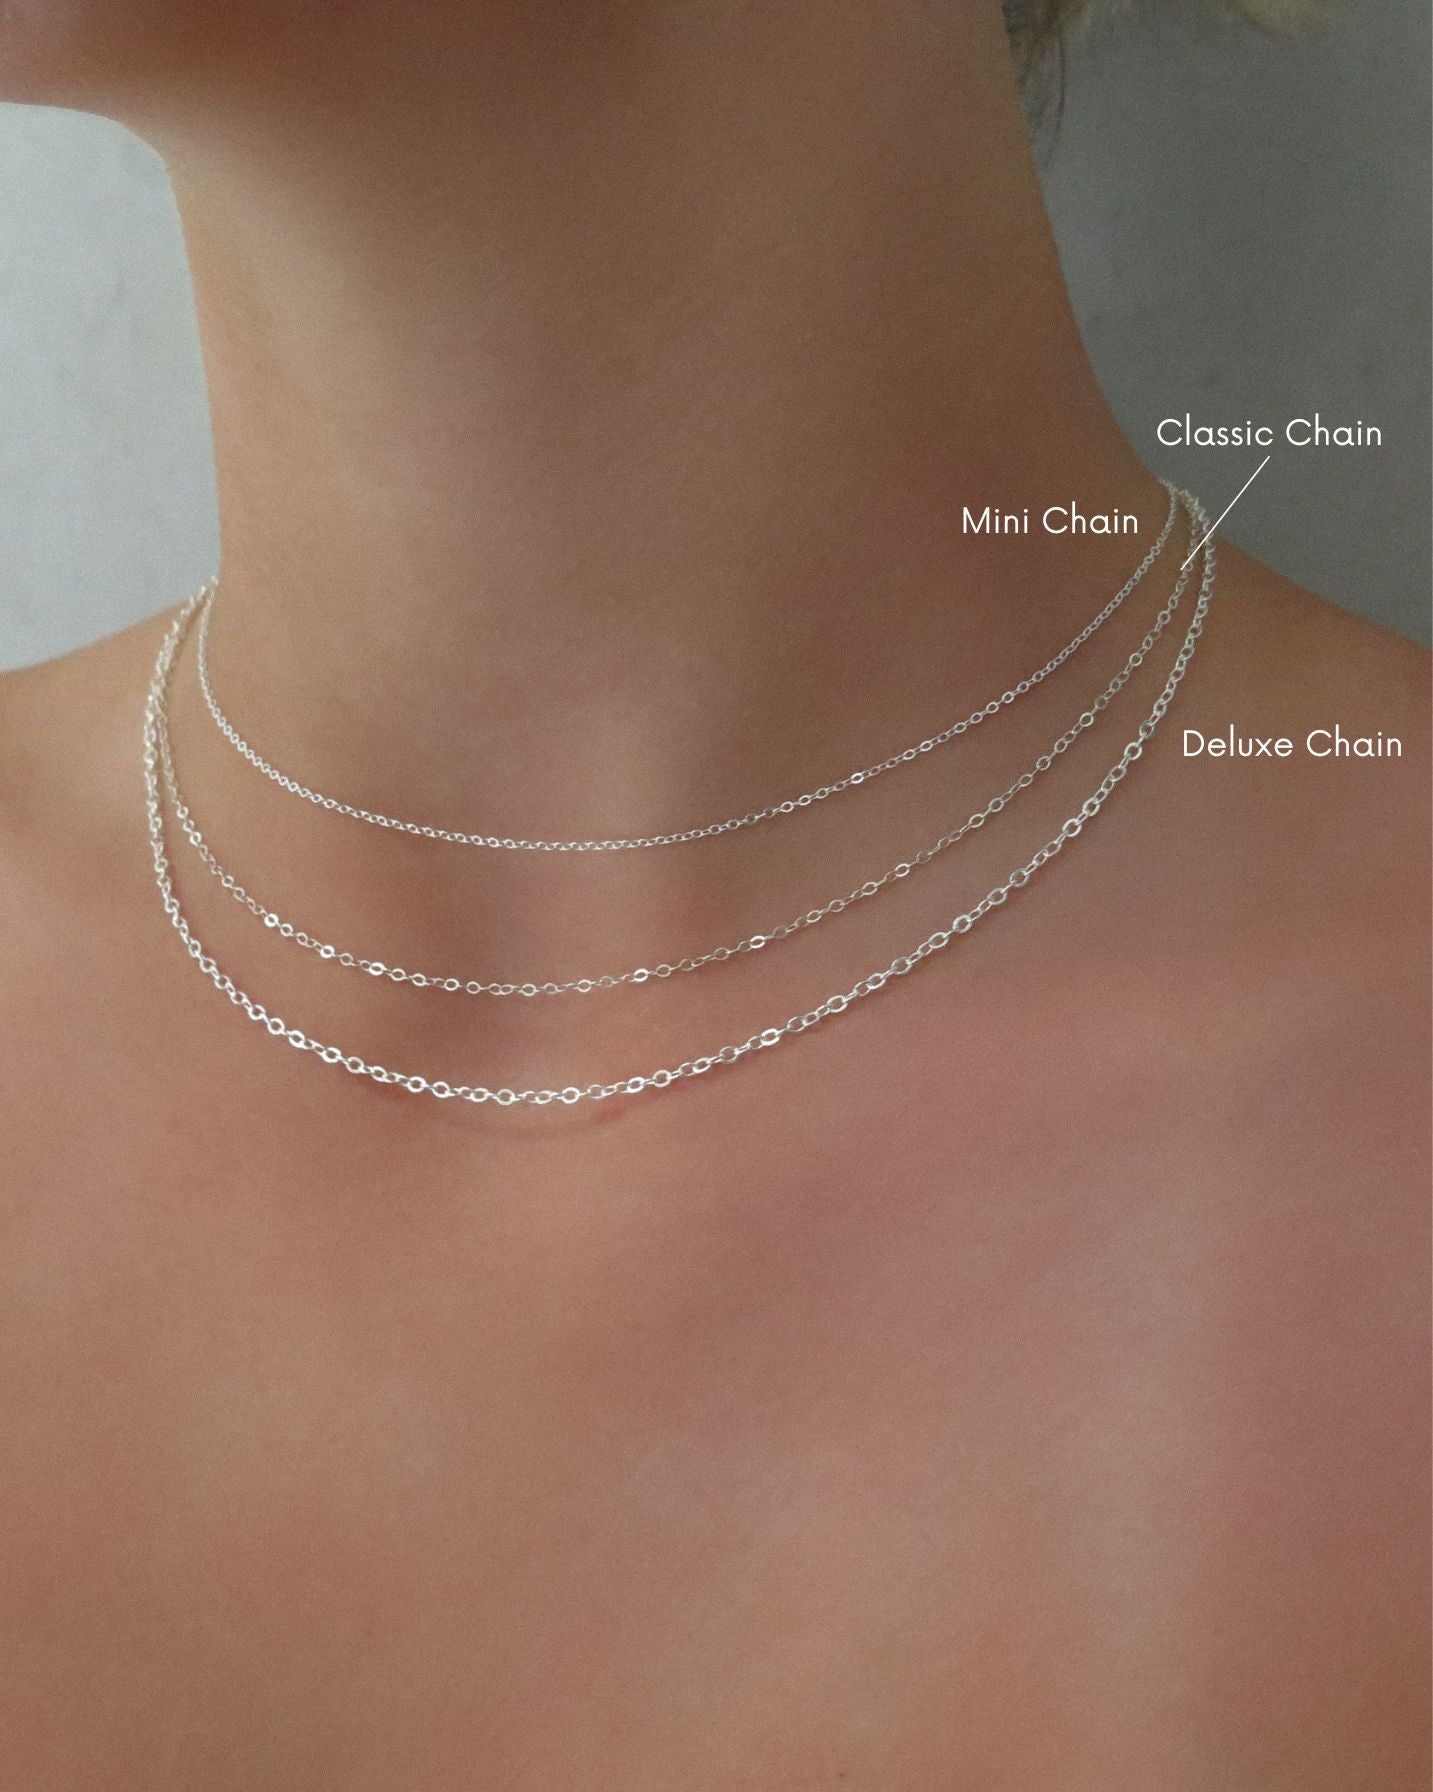 Classic Stack Necklace